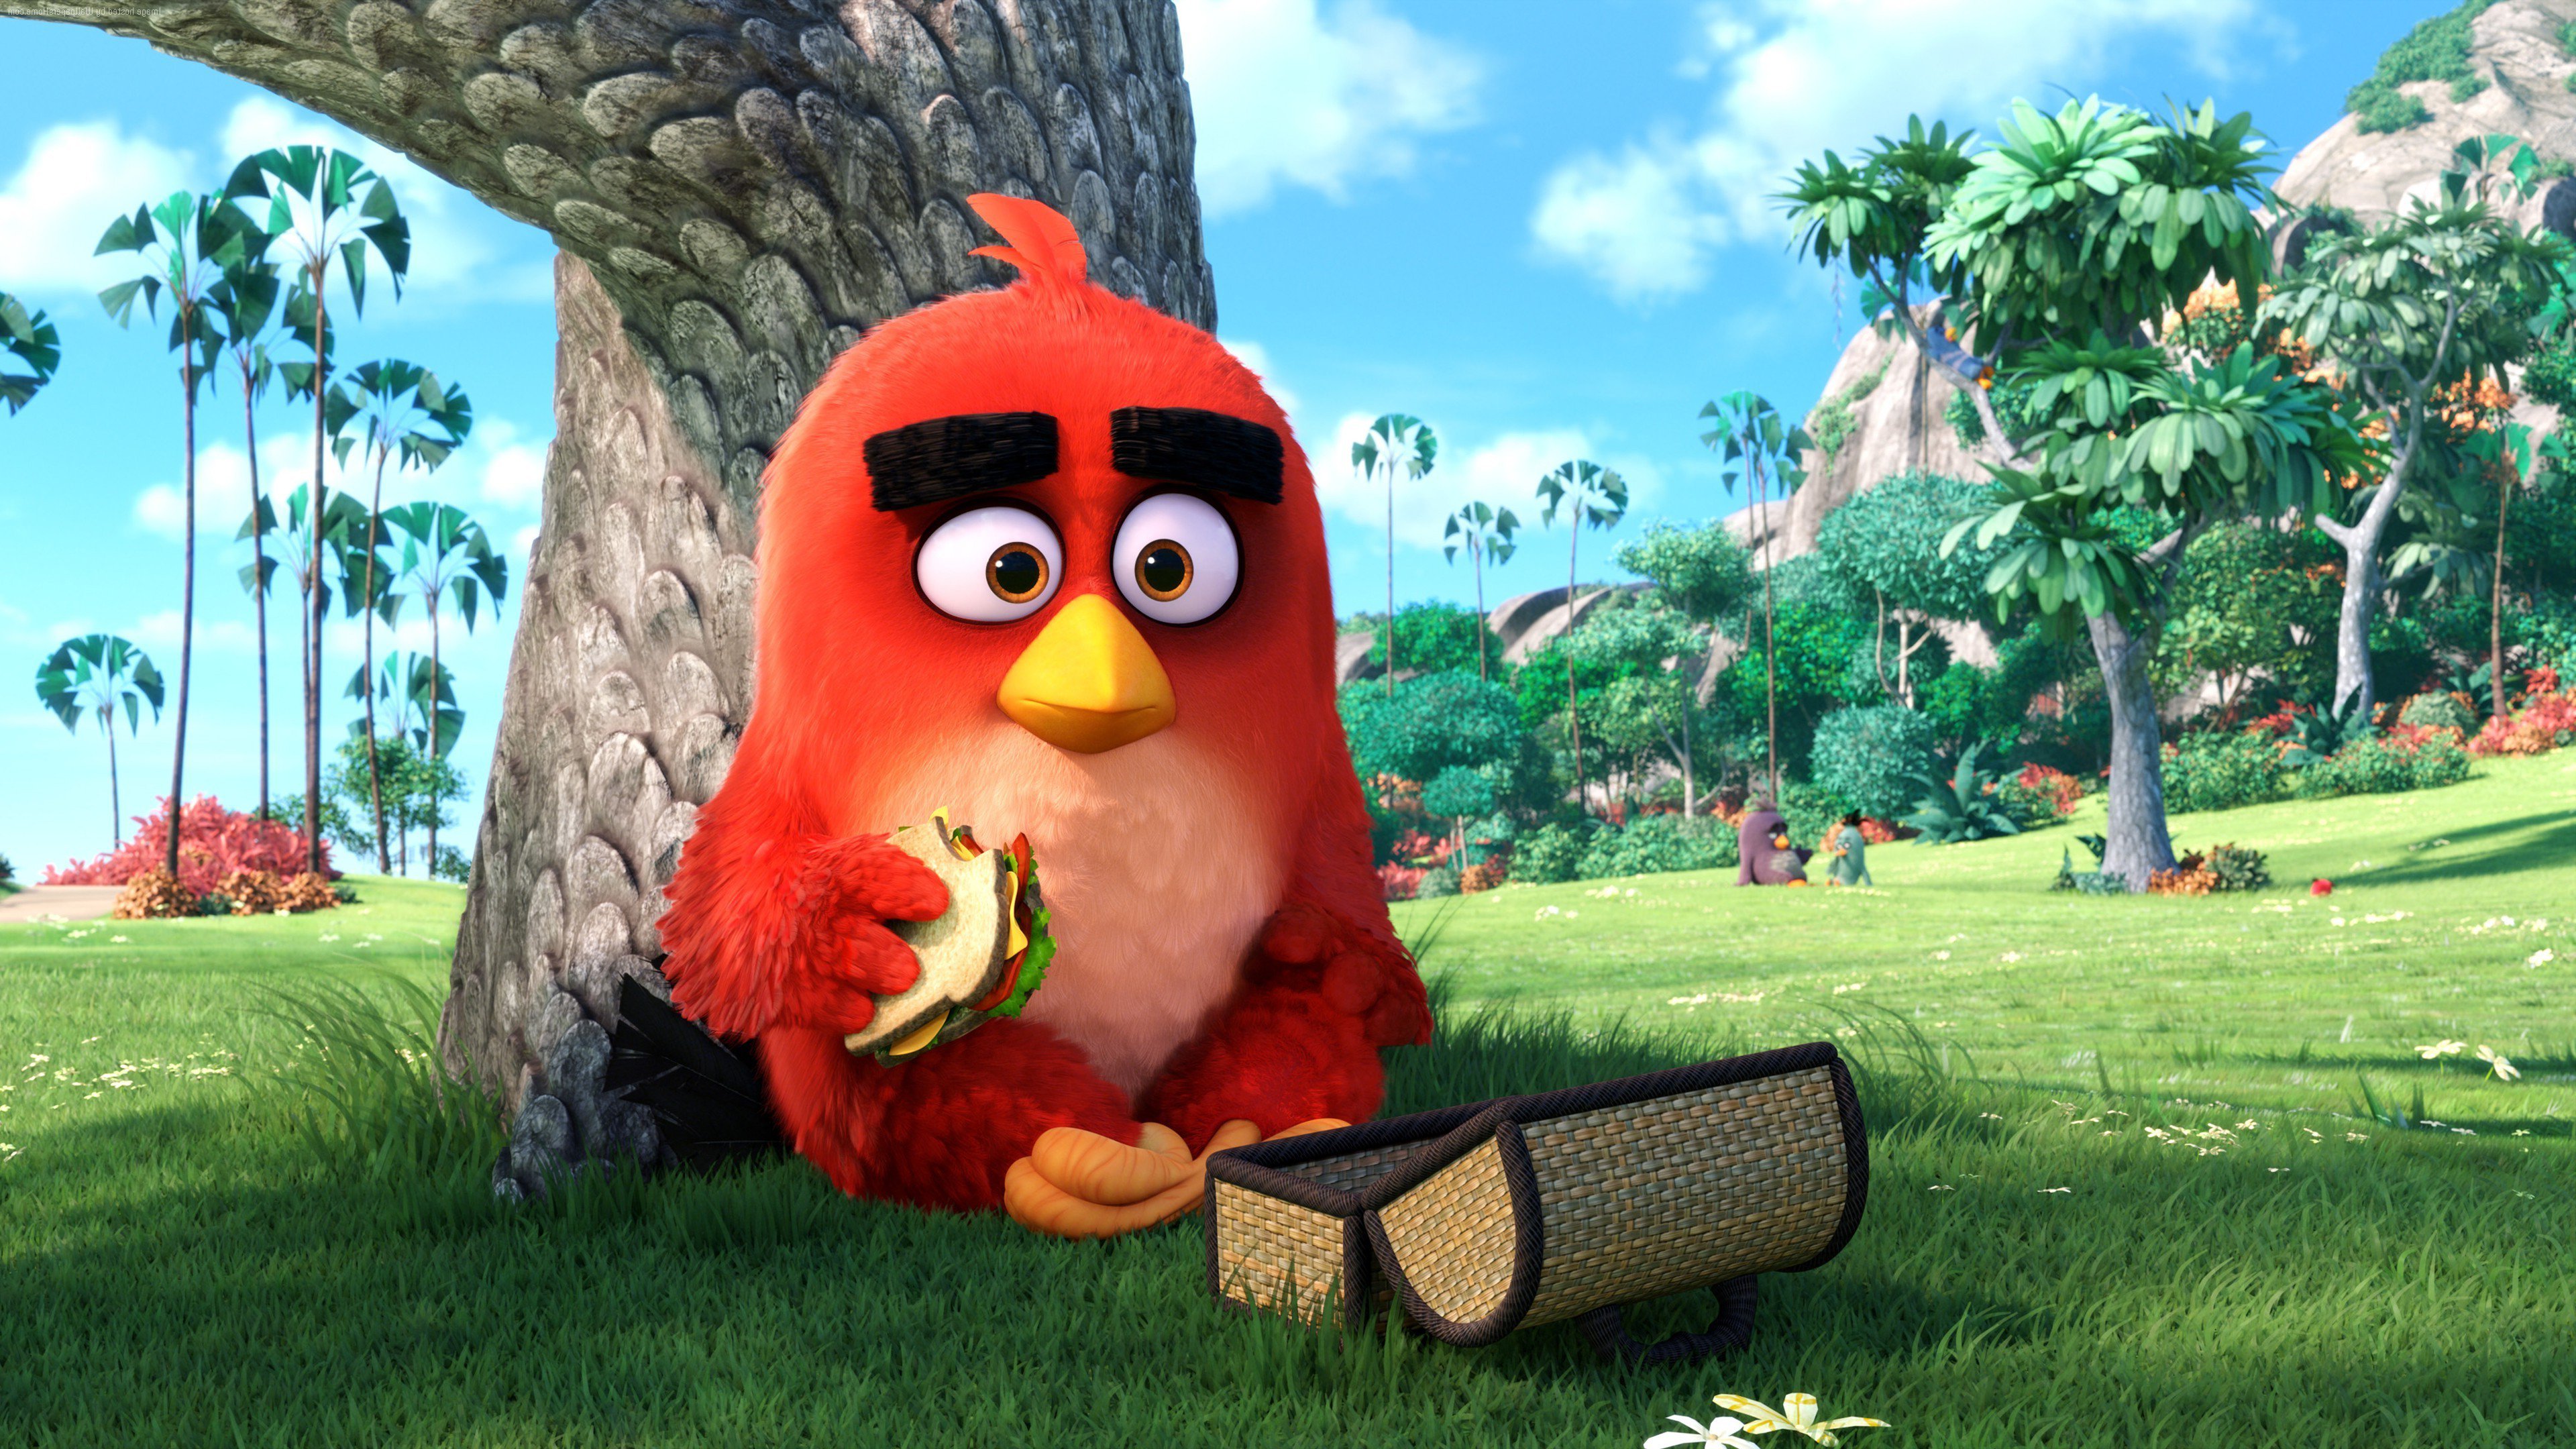 SEGA completes acquisition of Rovio Entertainment, developer of the famous "Angry Birds" mobile game series